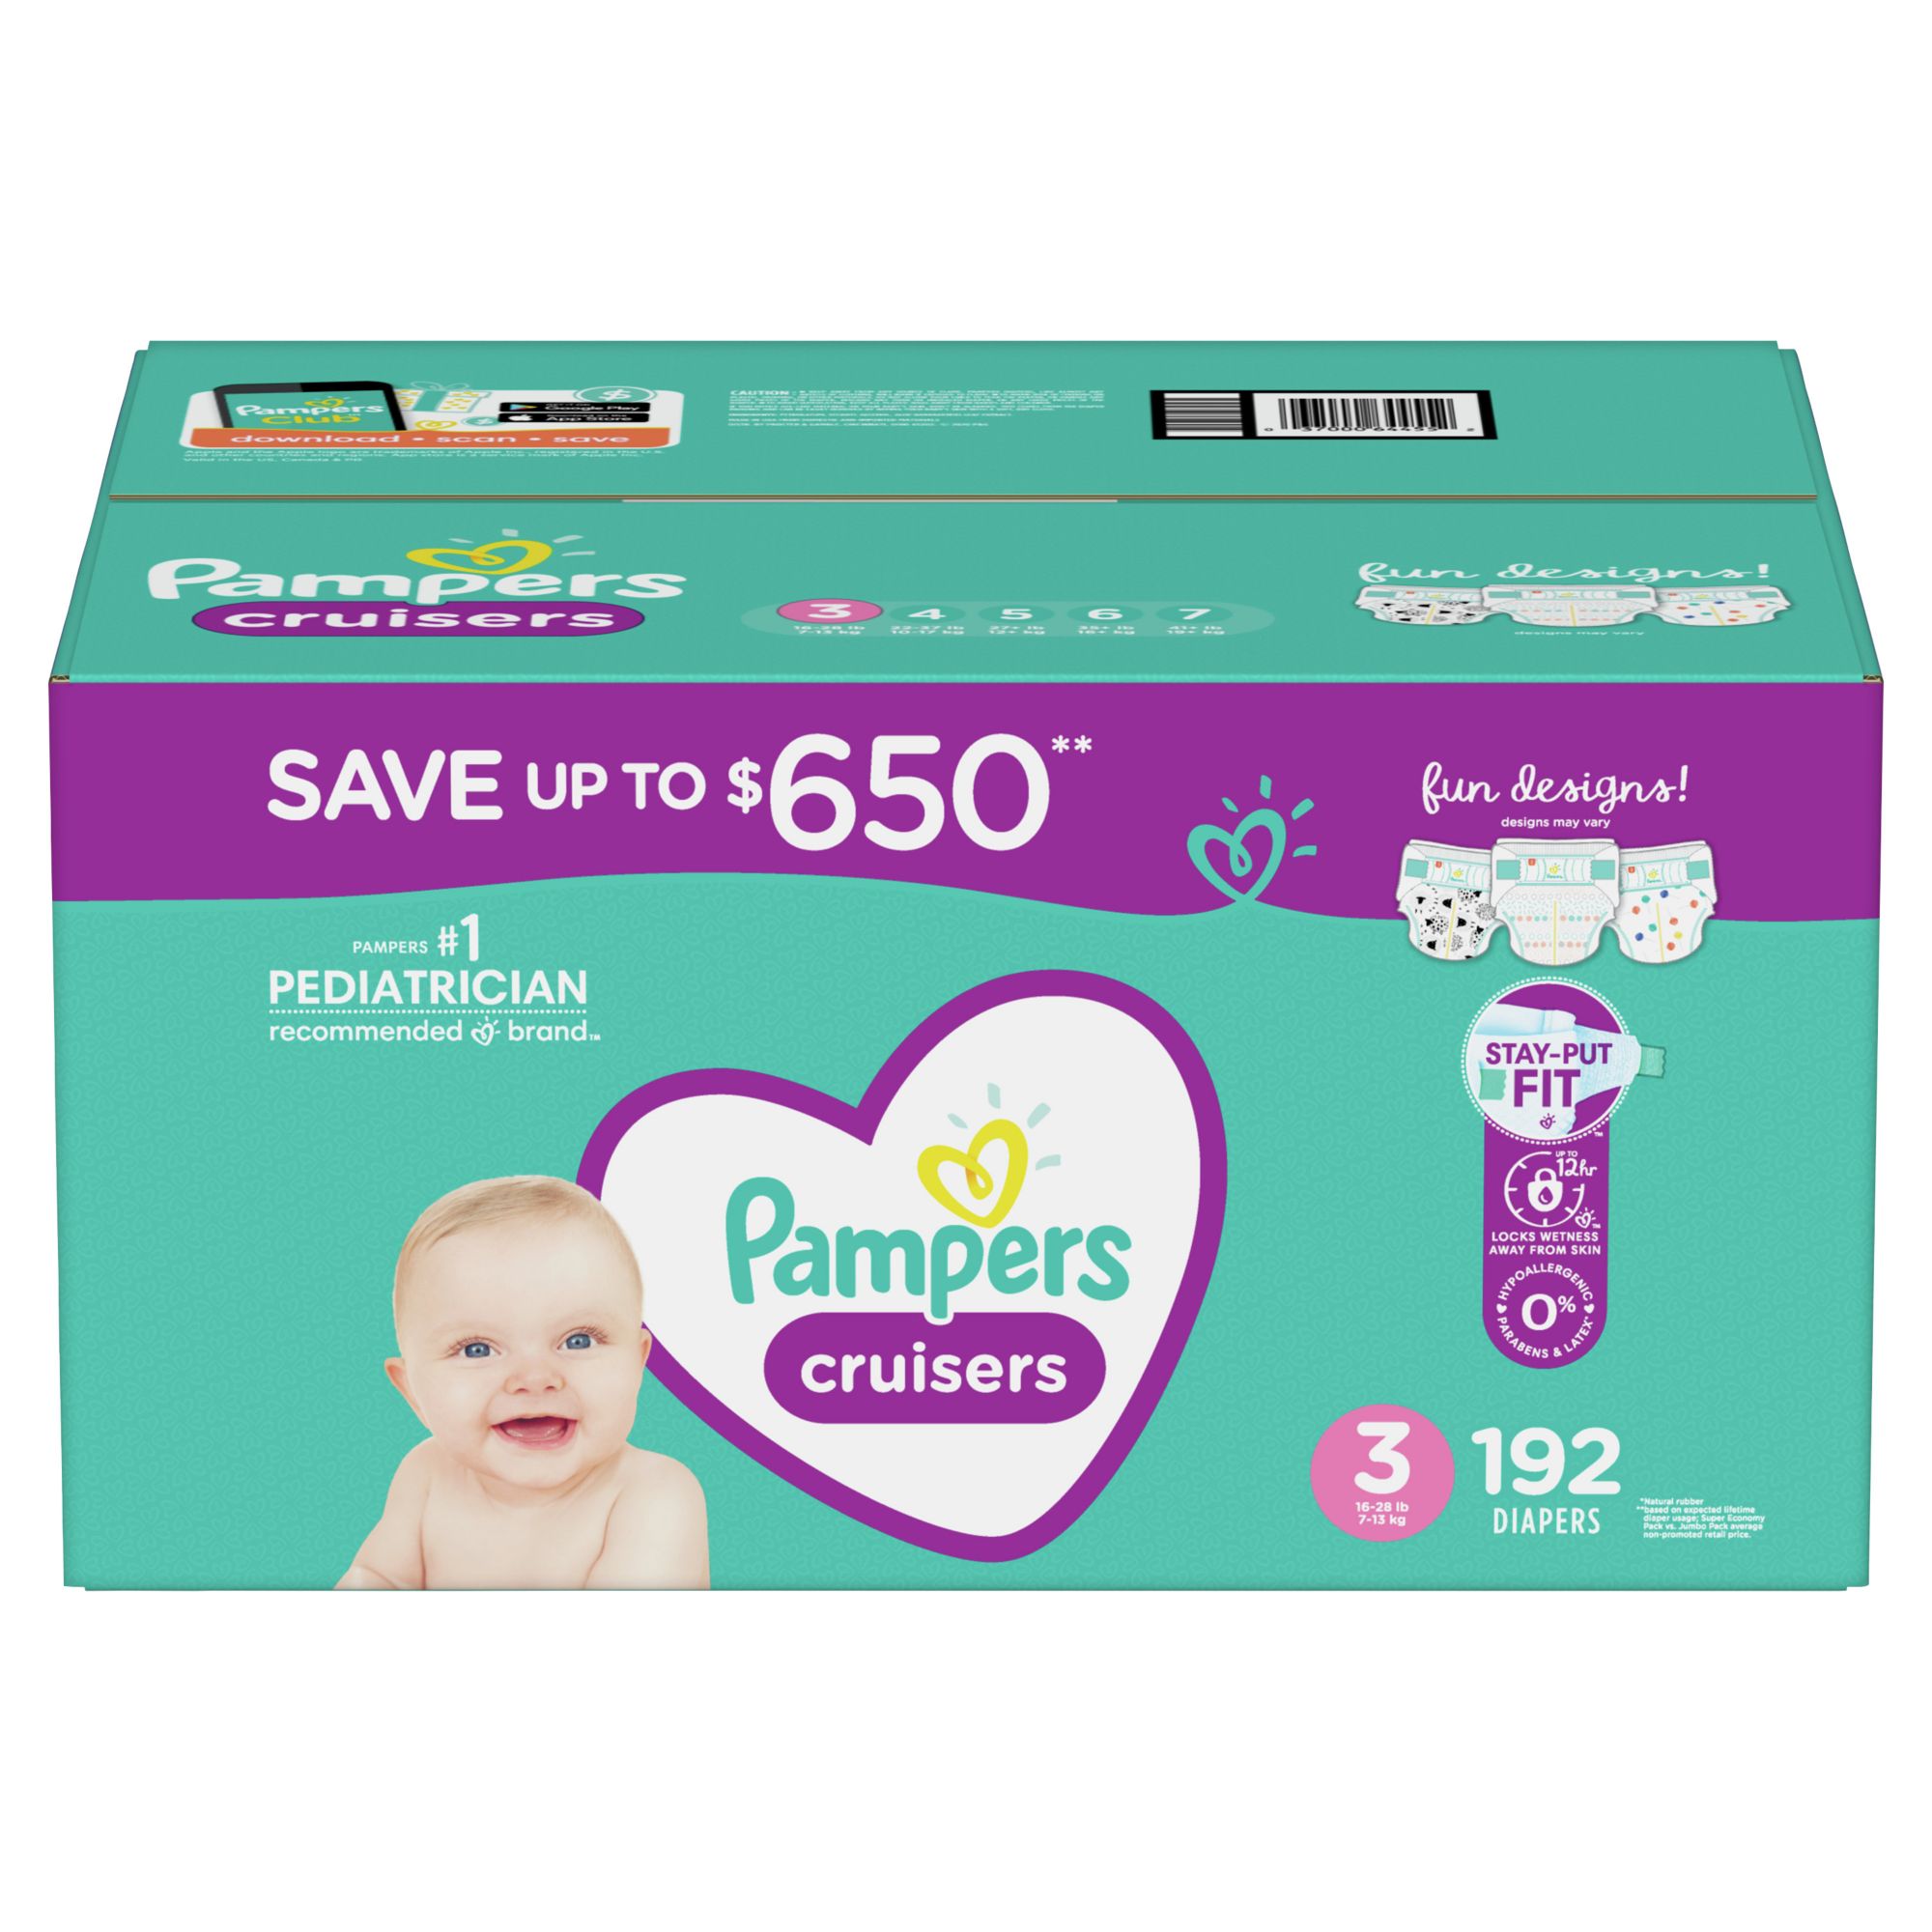 New and used Pampers Diapers for sale